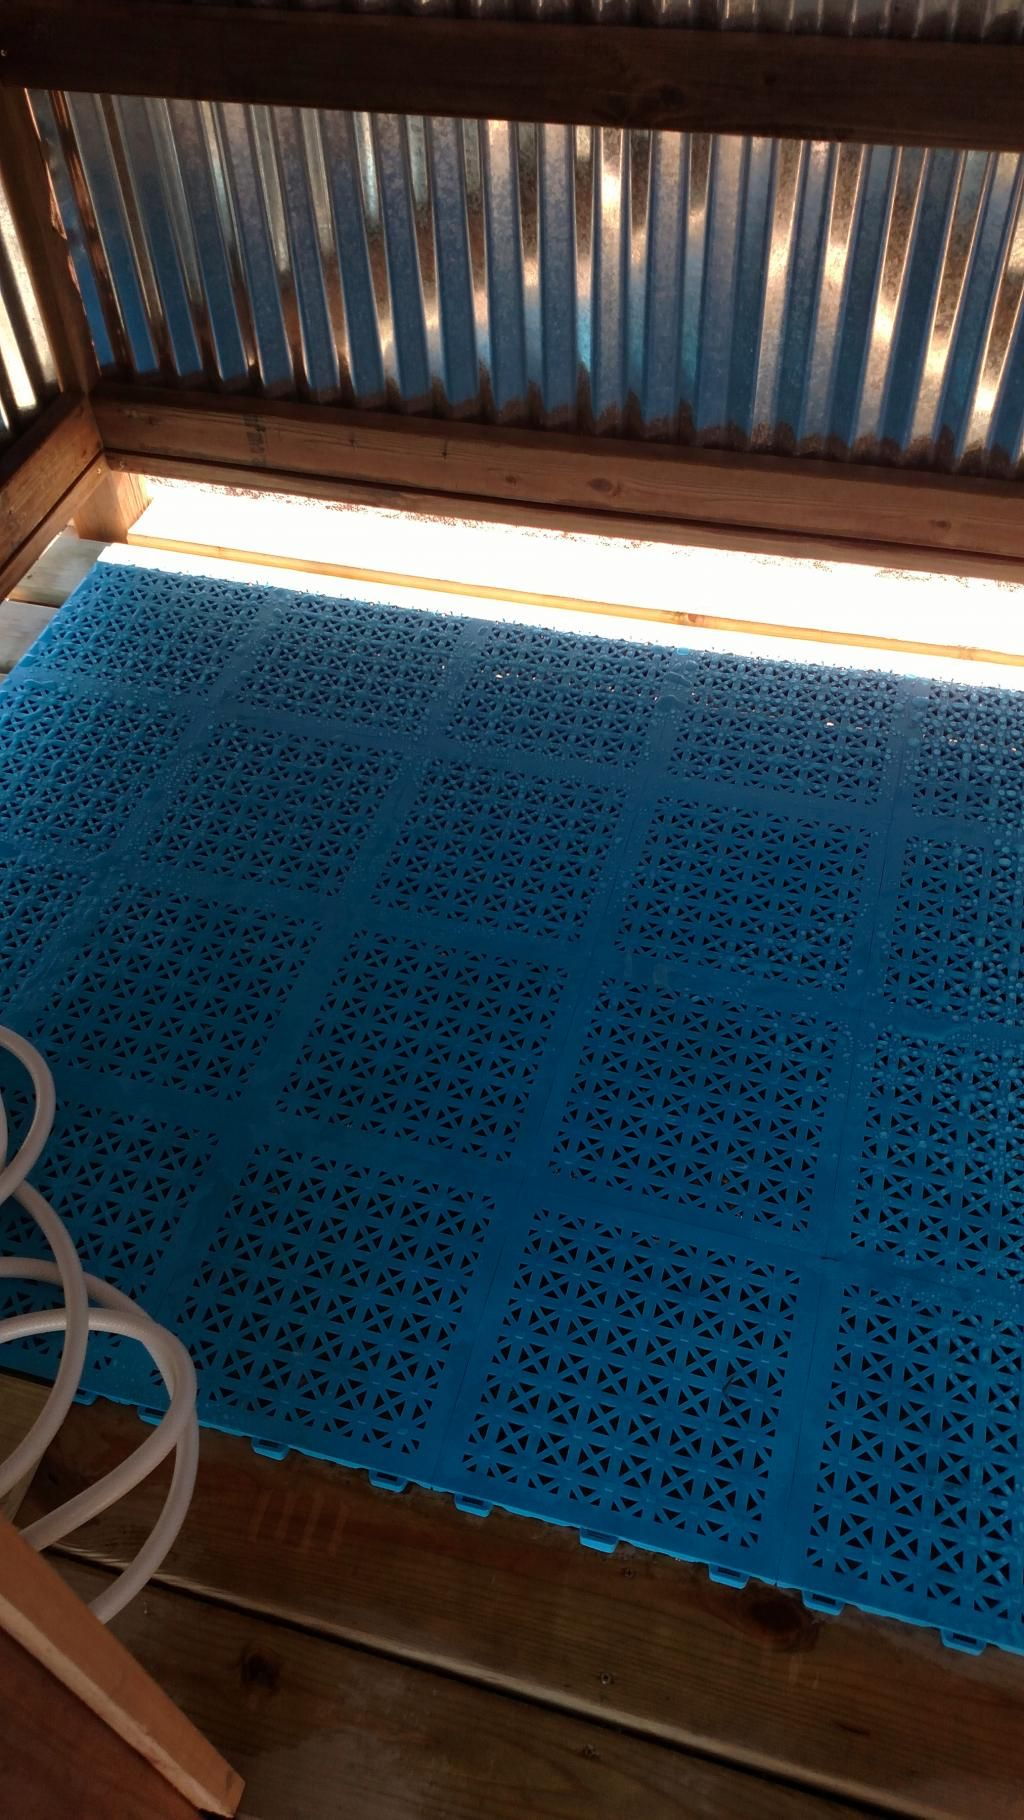 Staylock Tile Perforated Colors In 2019 Pool Deck Tiles And Mats in size 1024 X 1820